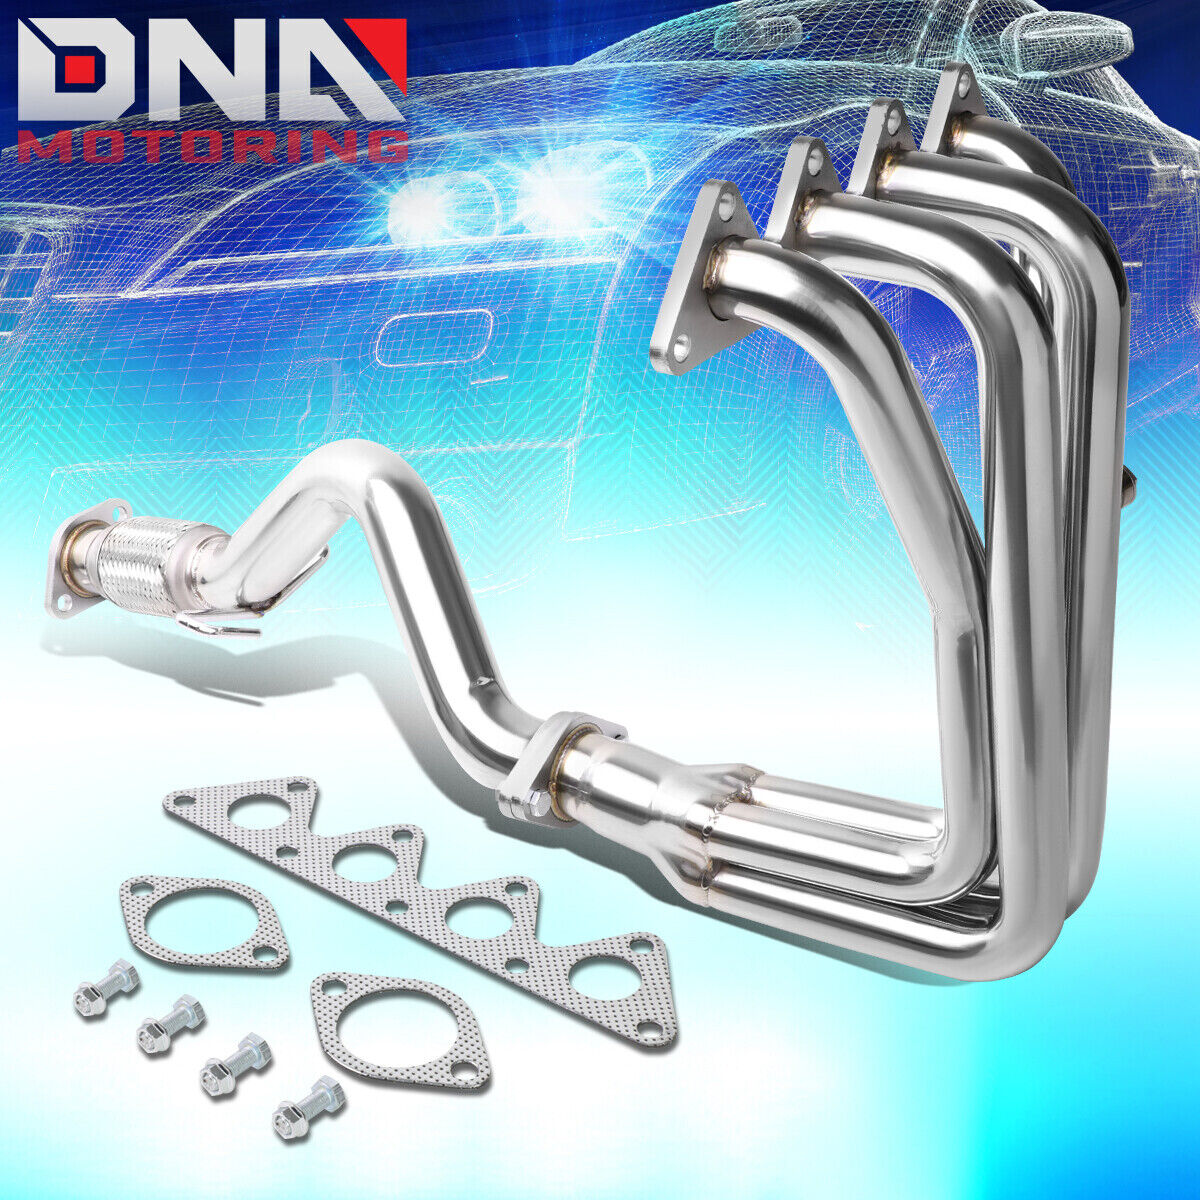 FOR 2006-2011 ACCENT/RIO/RIO5 STAINLESS 4-1 PERFORMANCE HEADER EXHAUST MANIFOLD